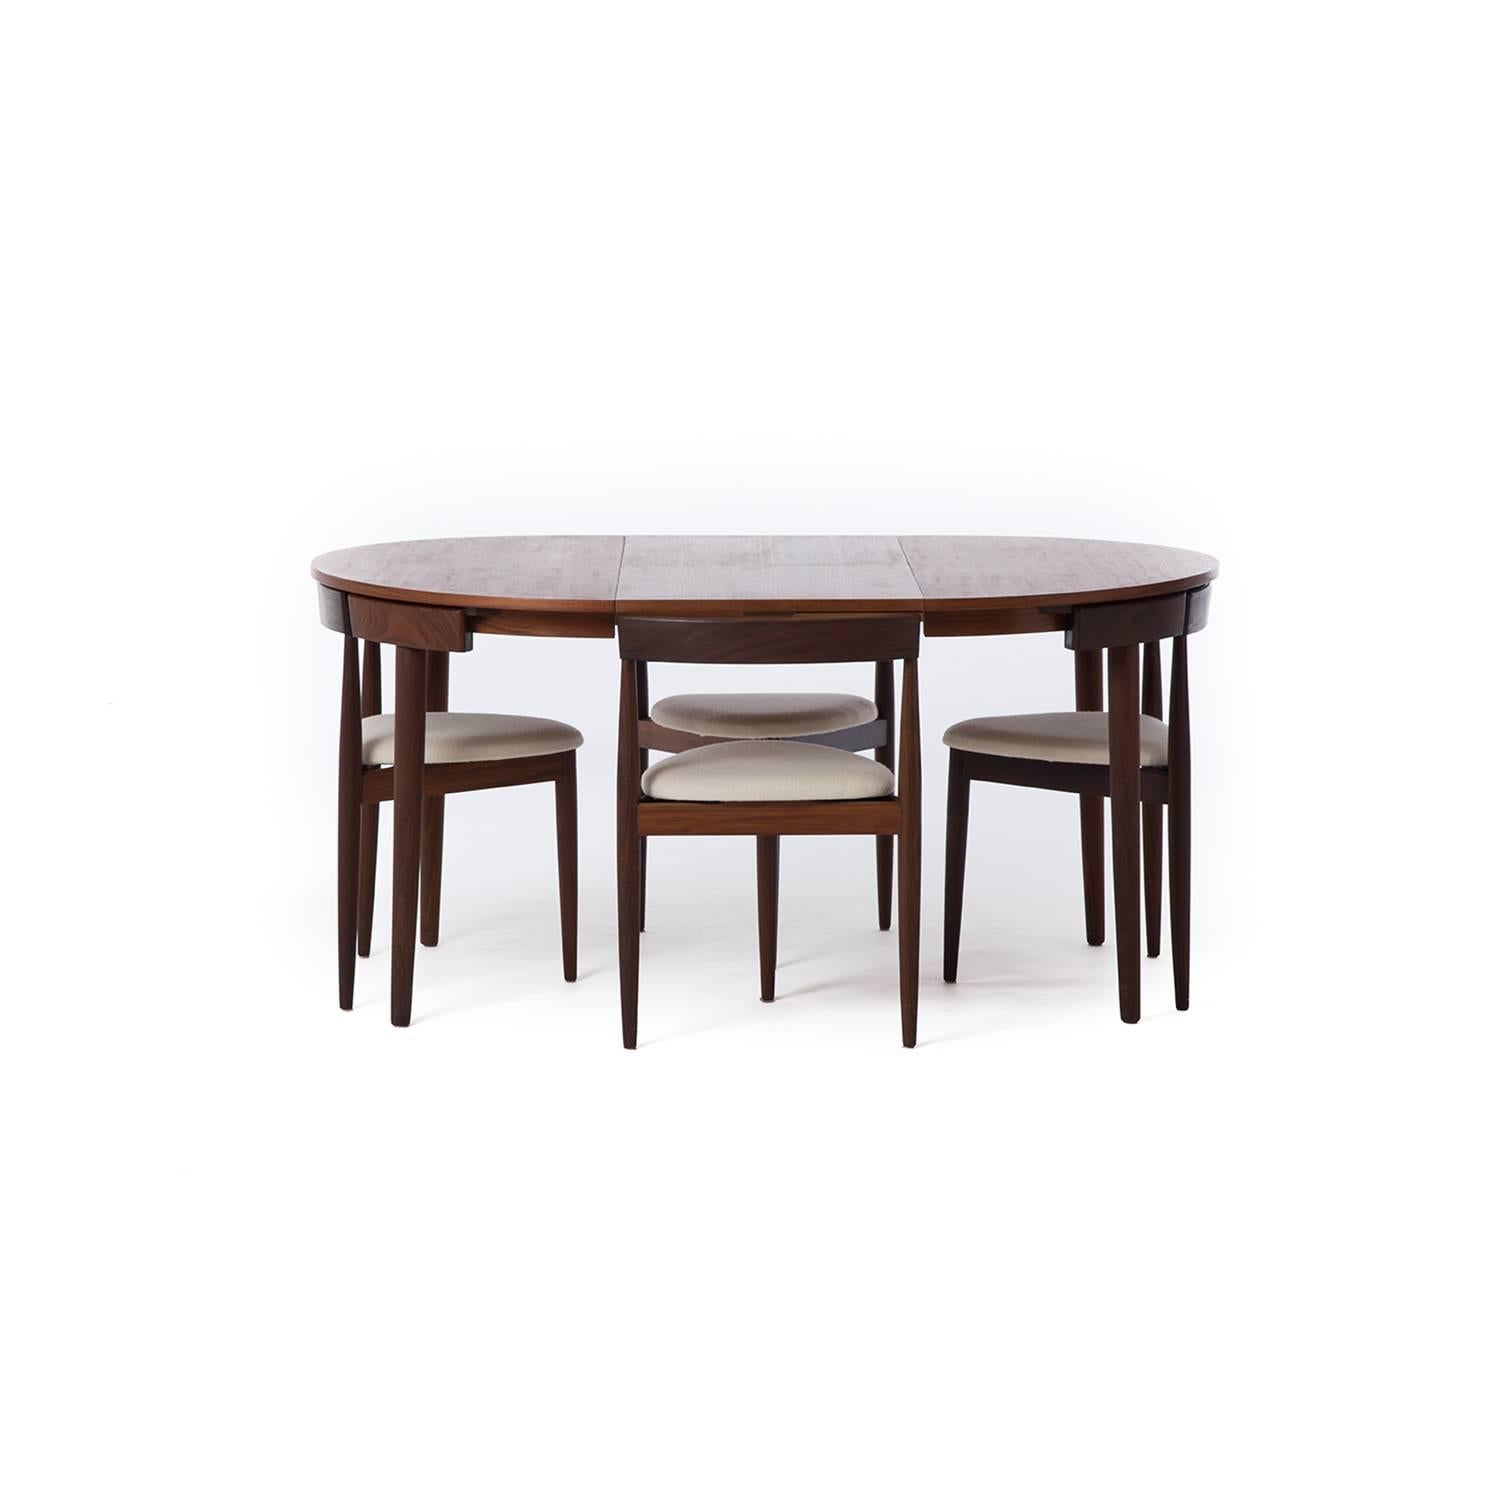 Oiled Danish Modern Dinette Set by Hans Olsen with Inset Chairs